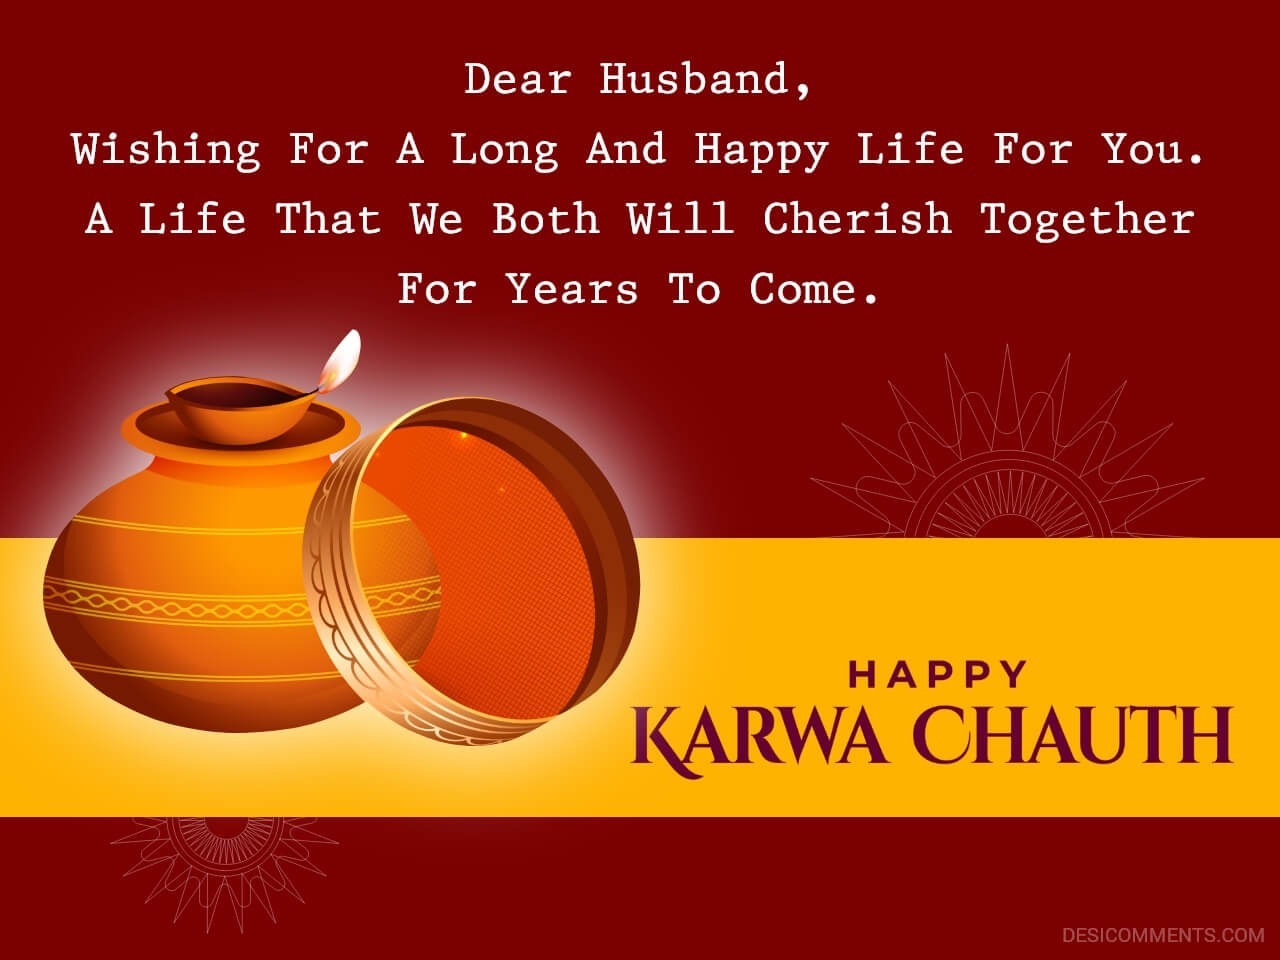 Dear Husband Wishing For A Long And Happy Life - DesiComments.com